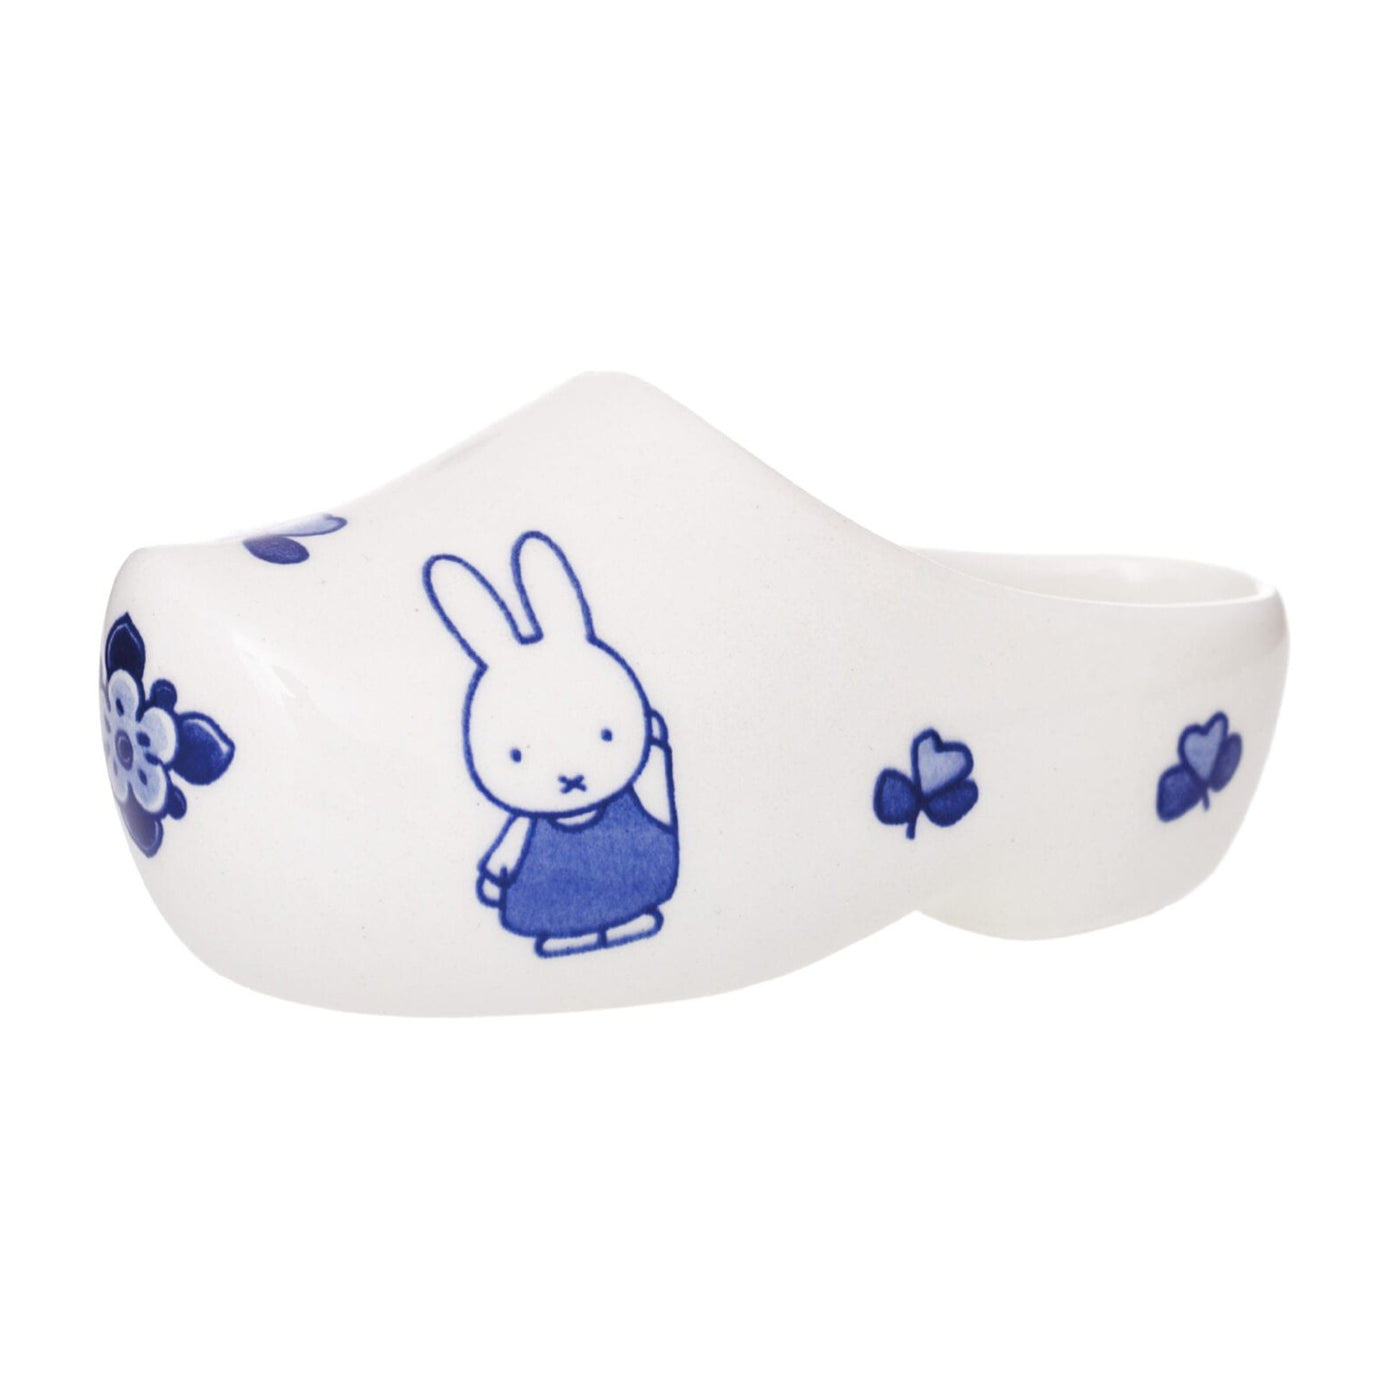 Miffy Clog Delft Blue by Royal Delft